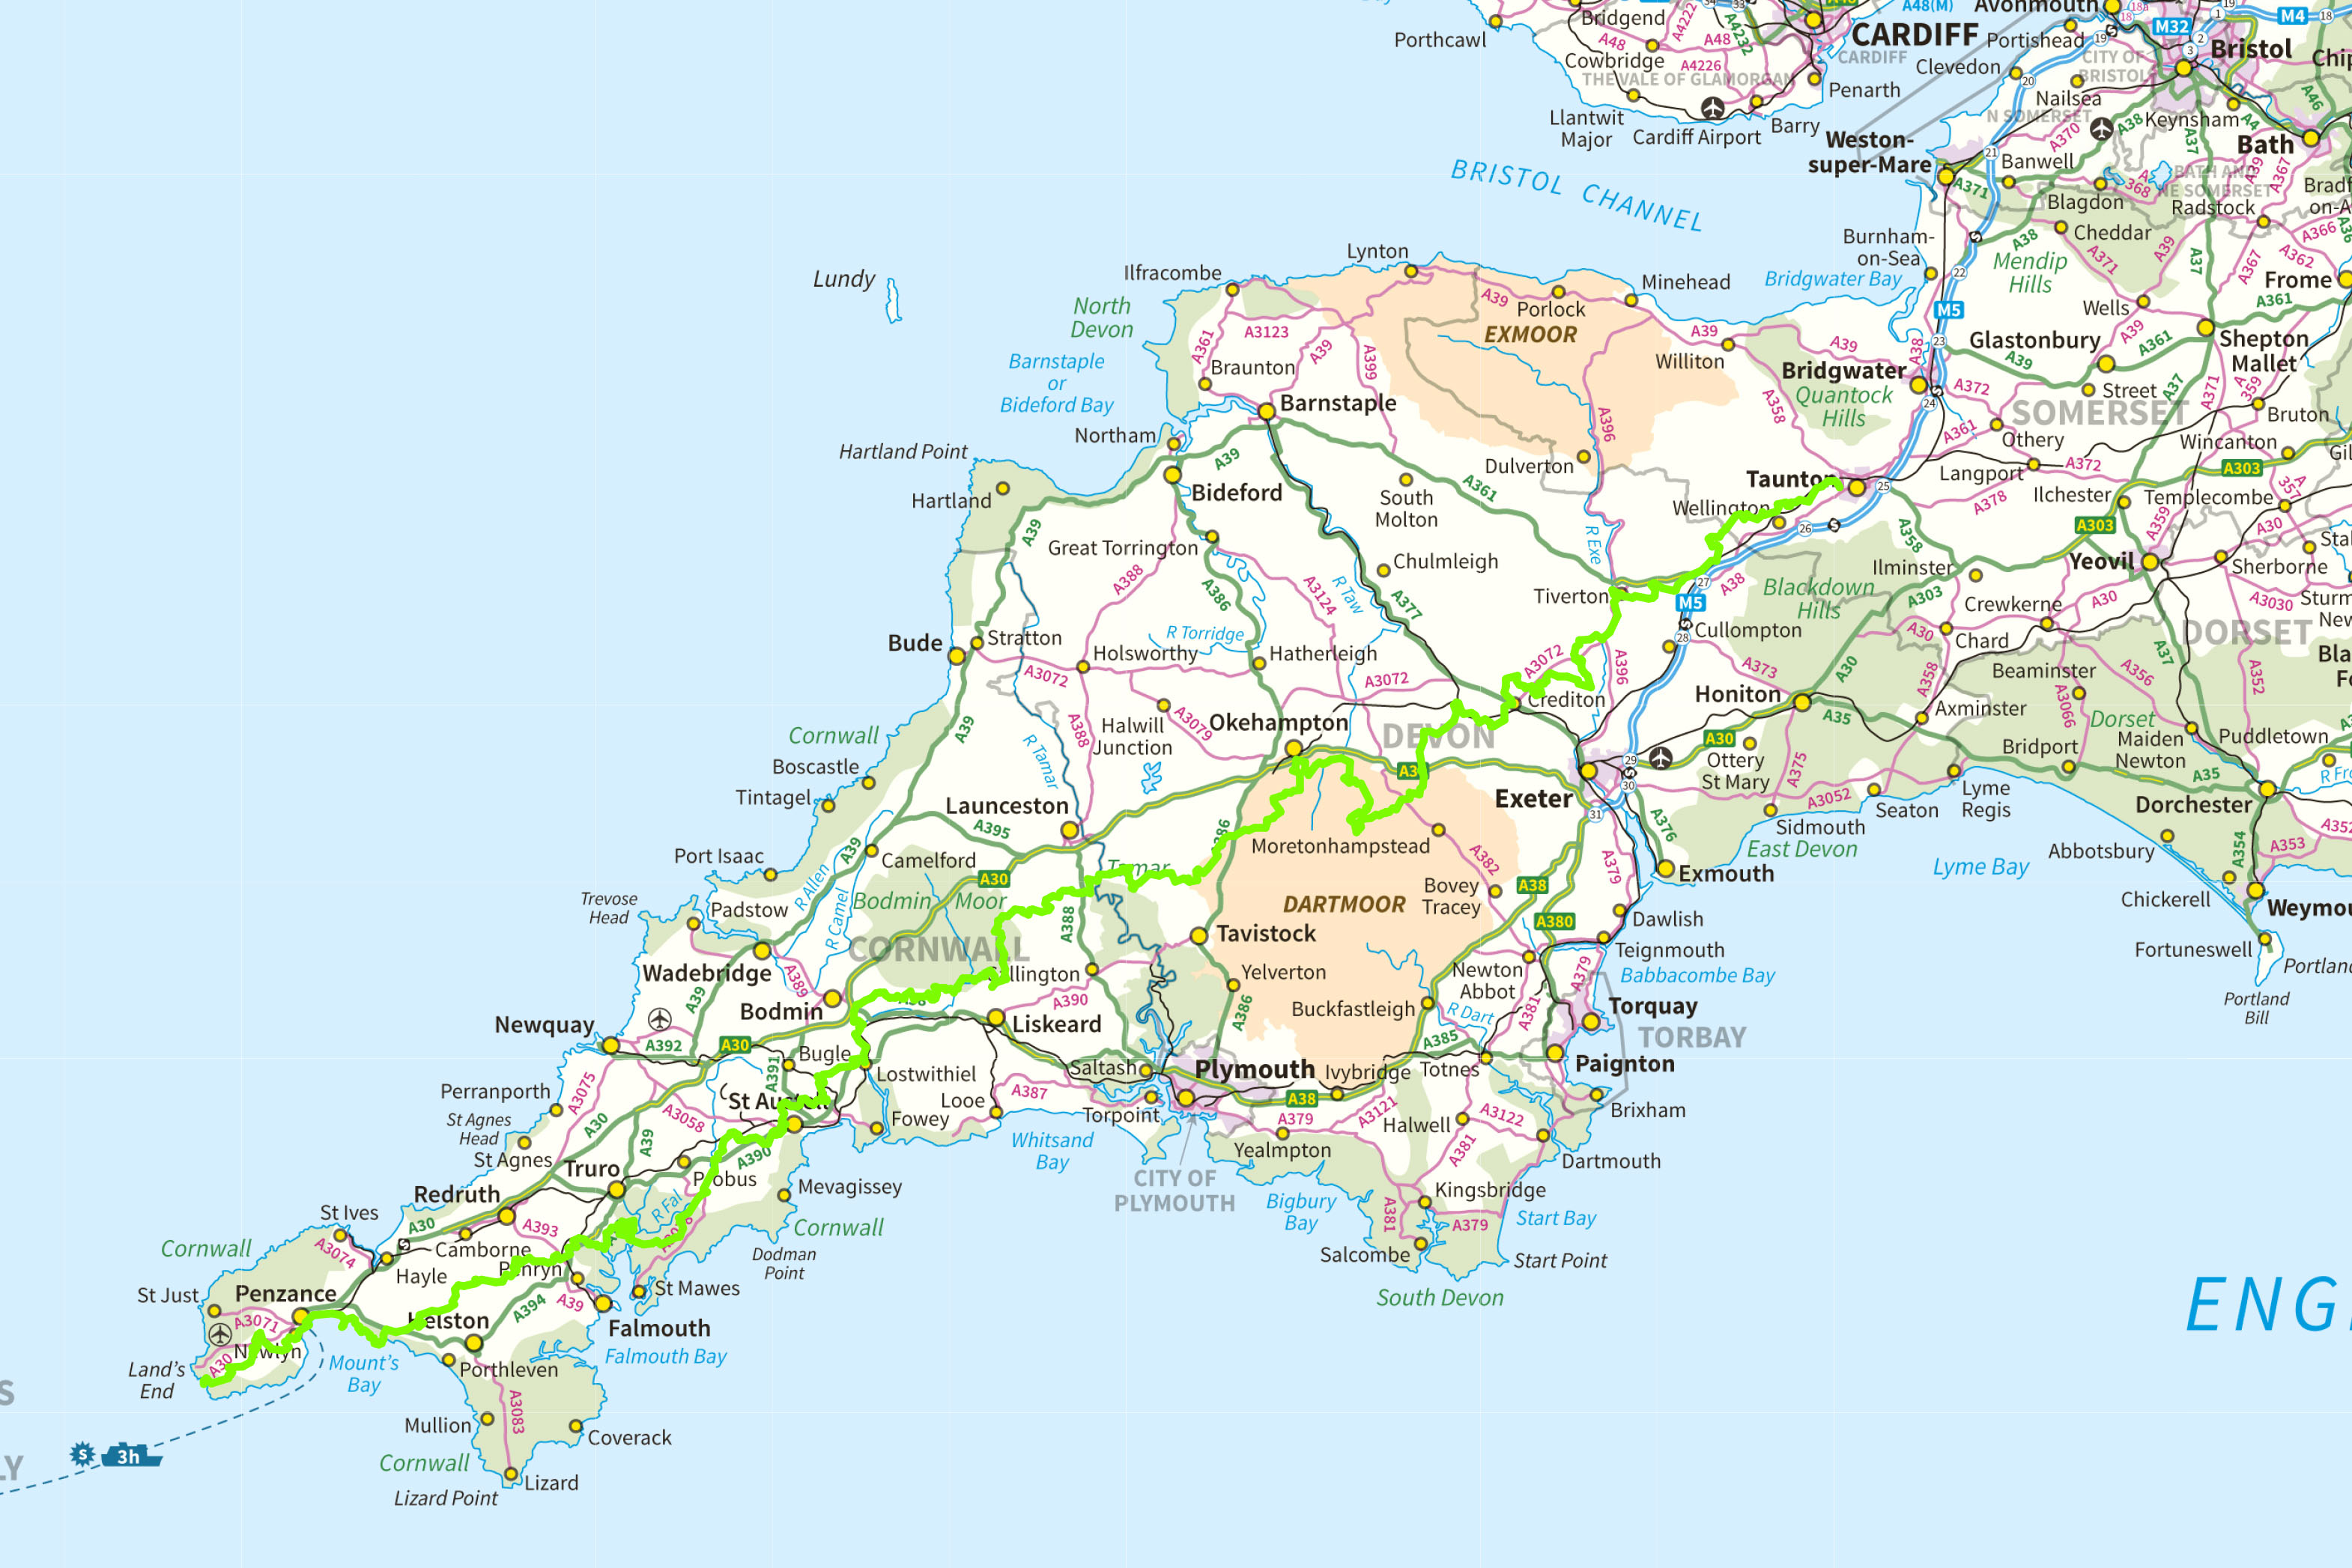 map of Cornwall and Devon with green line showing route walked to Taunton